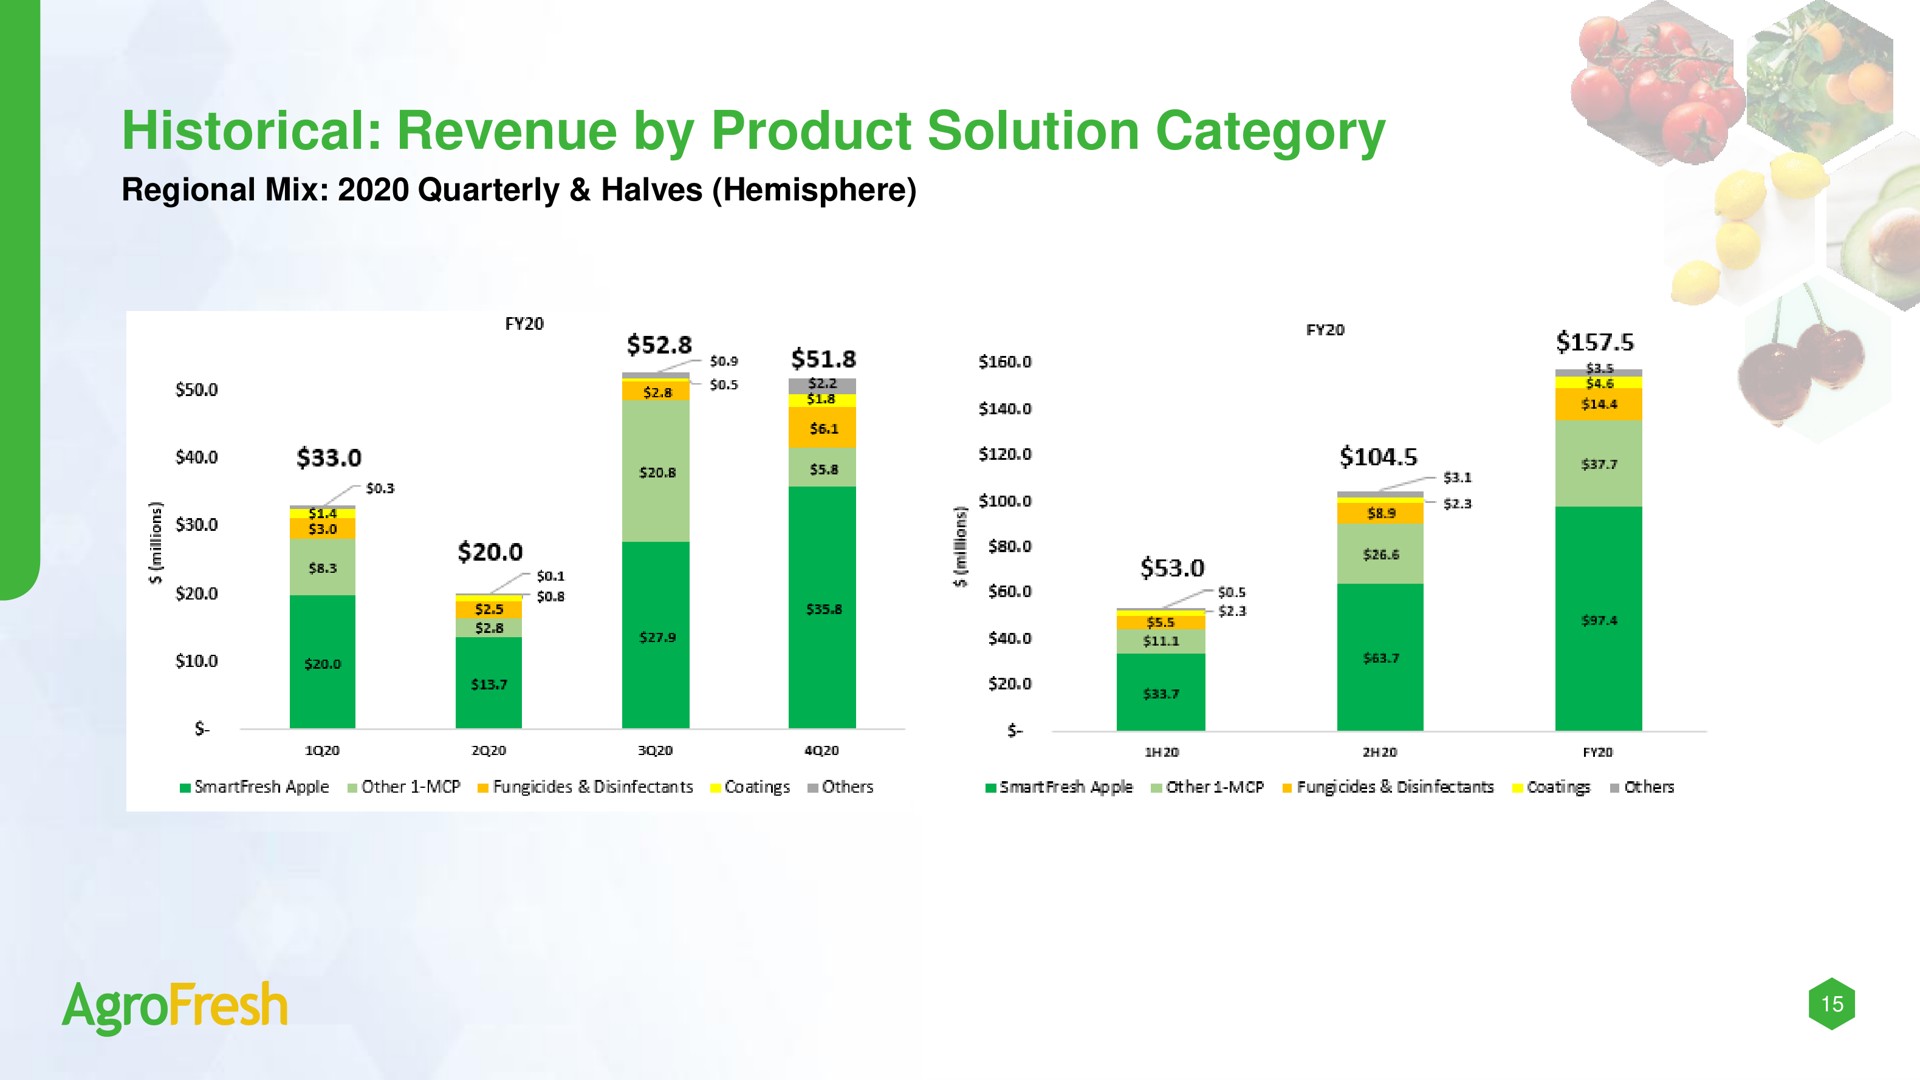 historical revenue by product solution category | AgroFresh